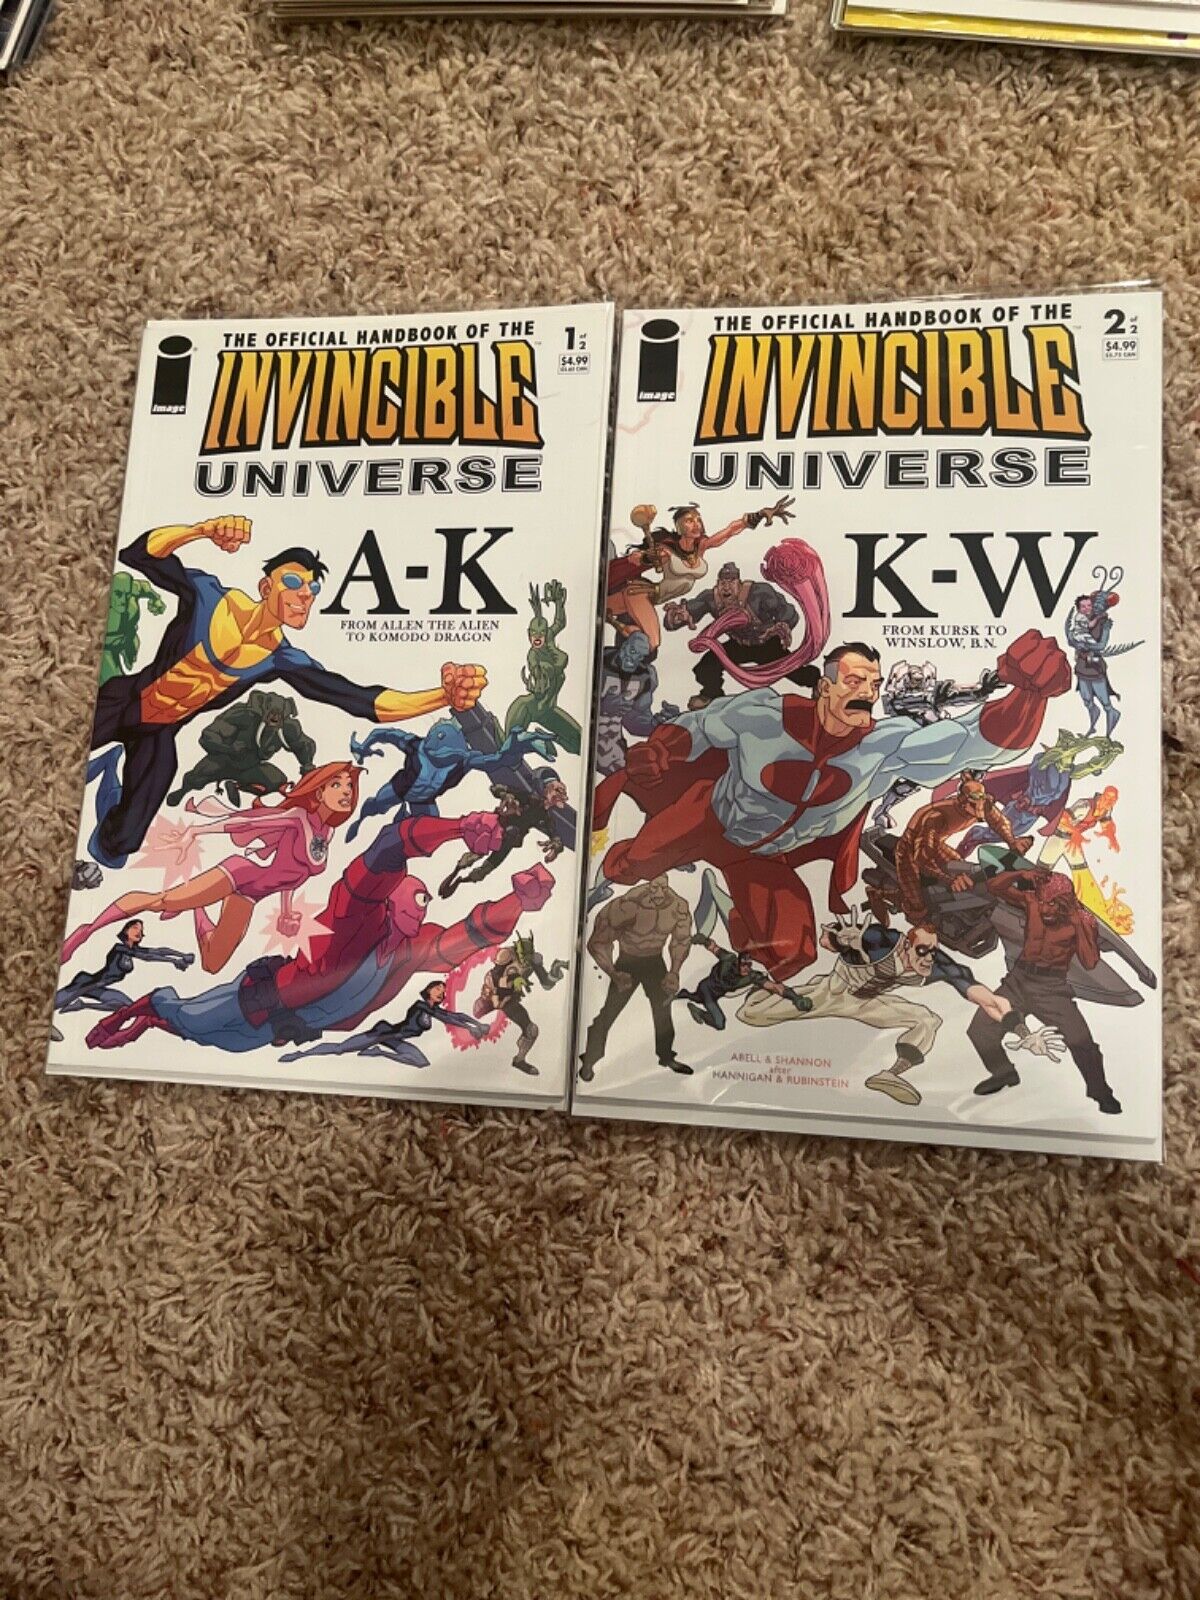 The Official Handbook Of The Invincible Universe A-K and K-W Lot Of 2